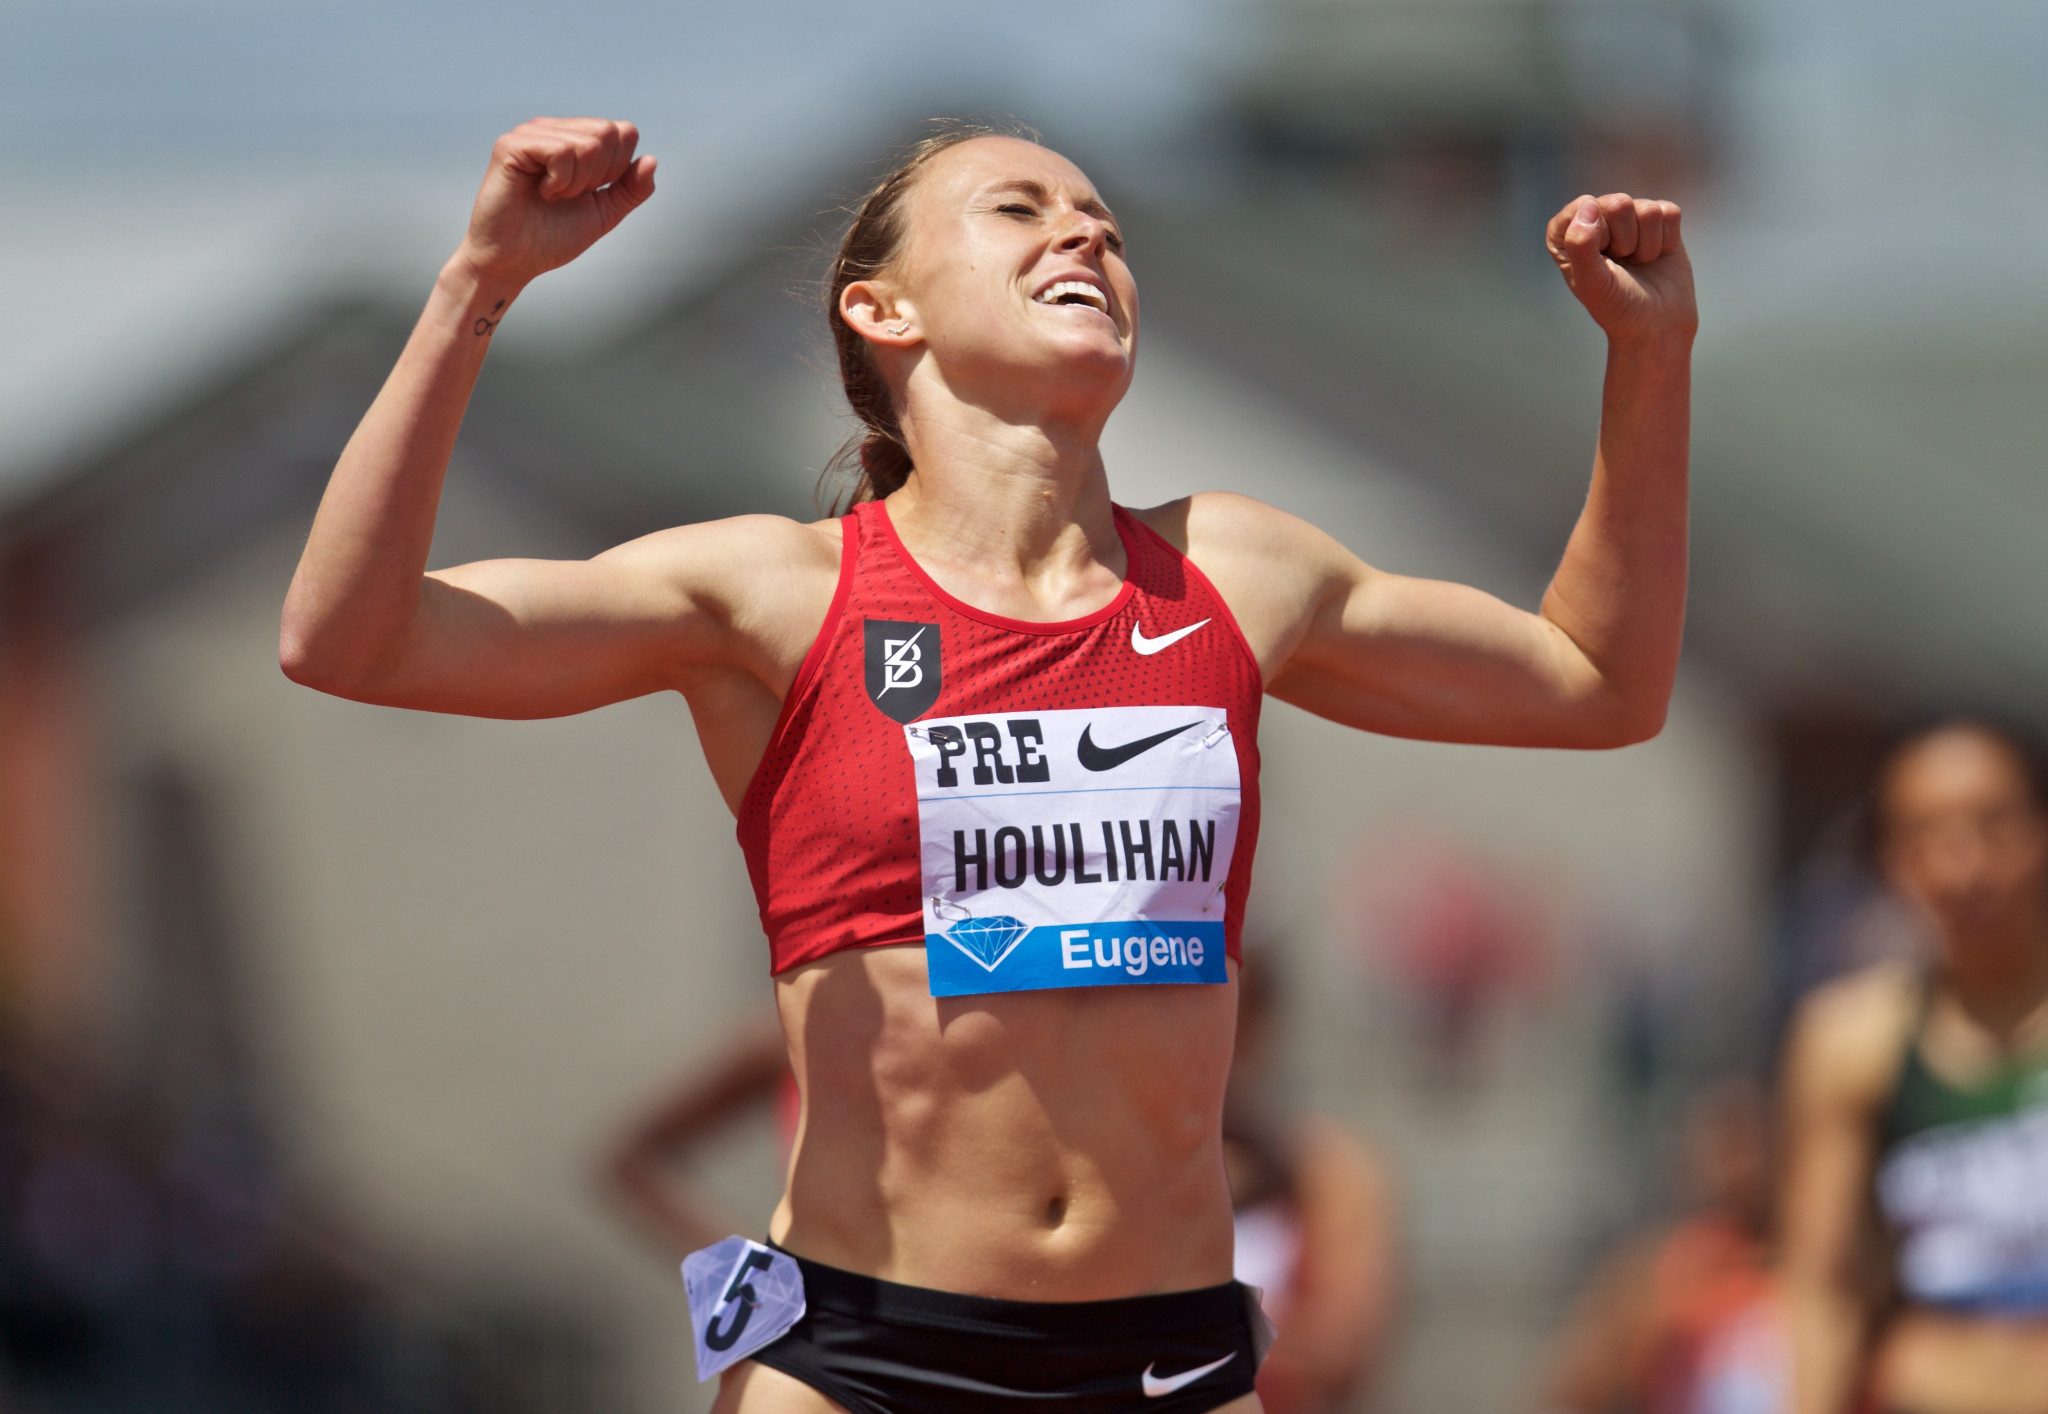 American middle-distance runner Shelby Houlihan was handed a four-year doping ban shortly before the Tokyo 2020 Olympics ©Getty Images